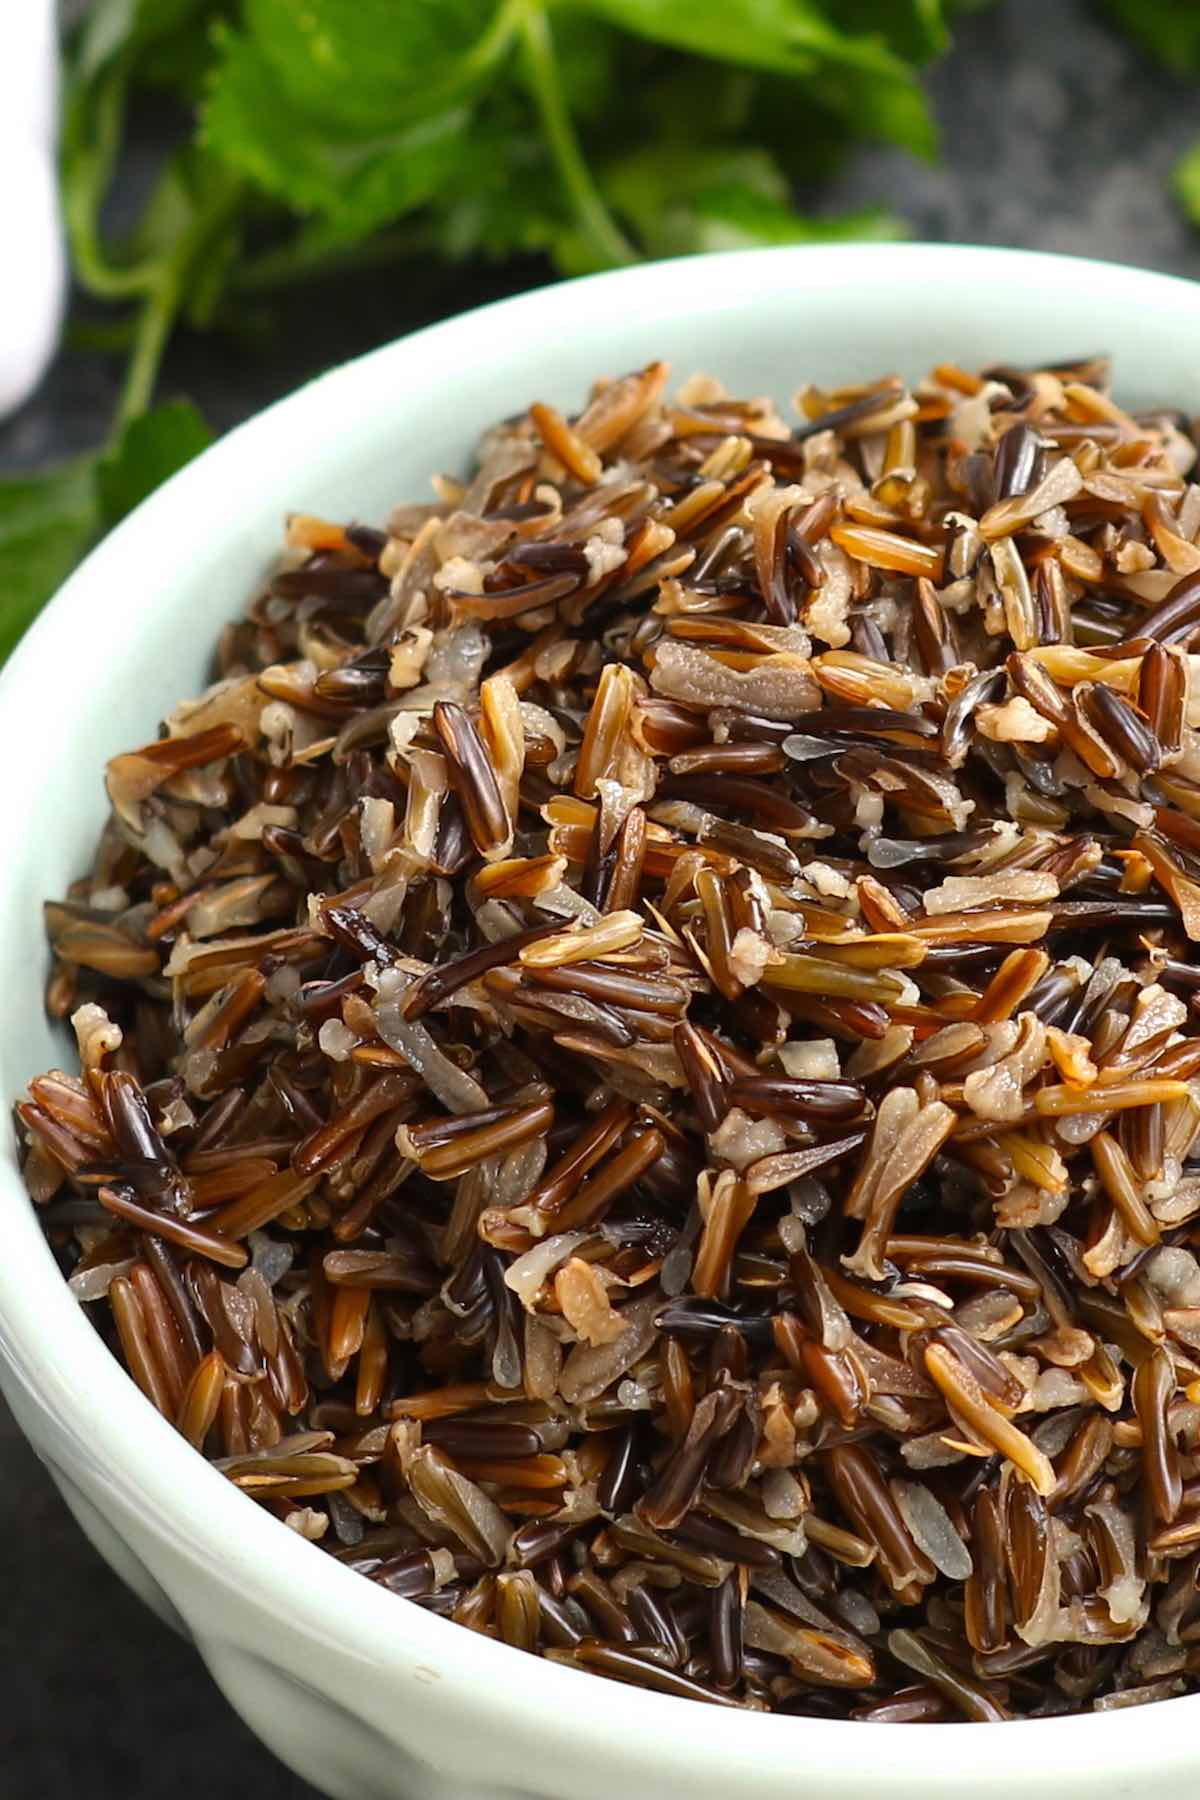 Perfectly cooked wild rice in a serving bowl showing its fluffy, chewy texture and walnut color